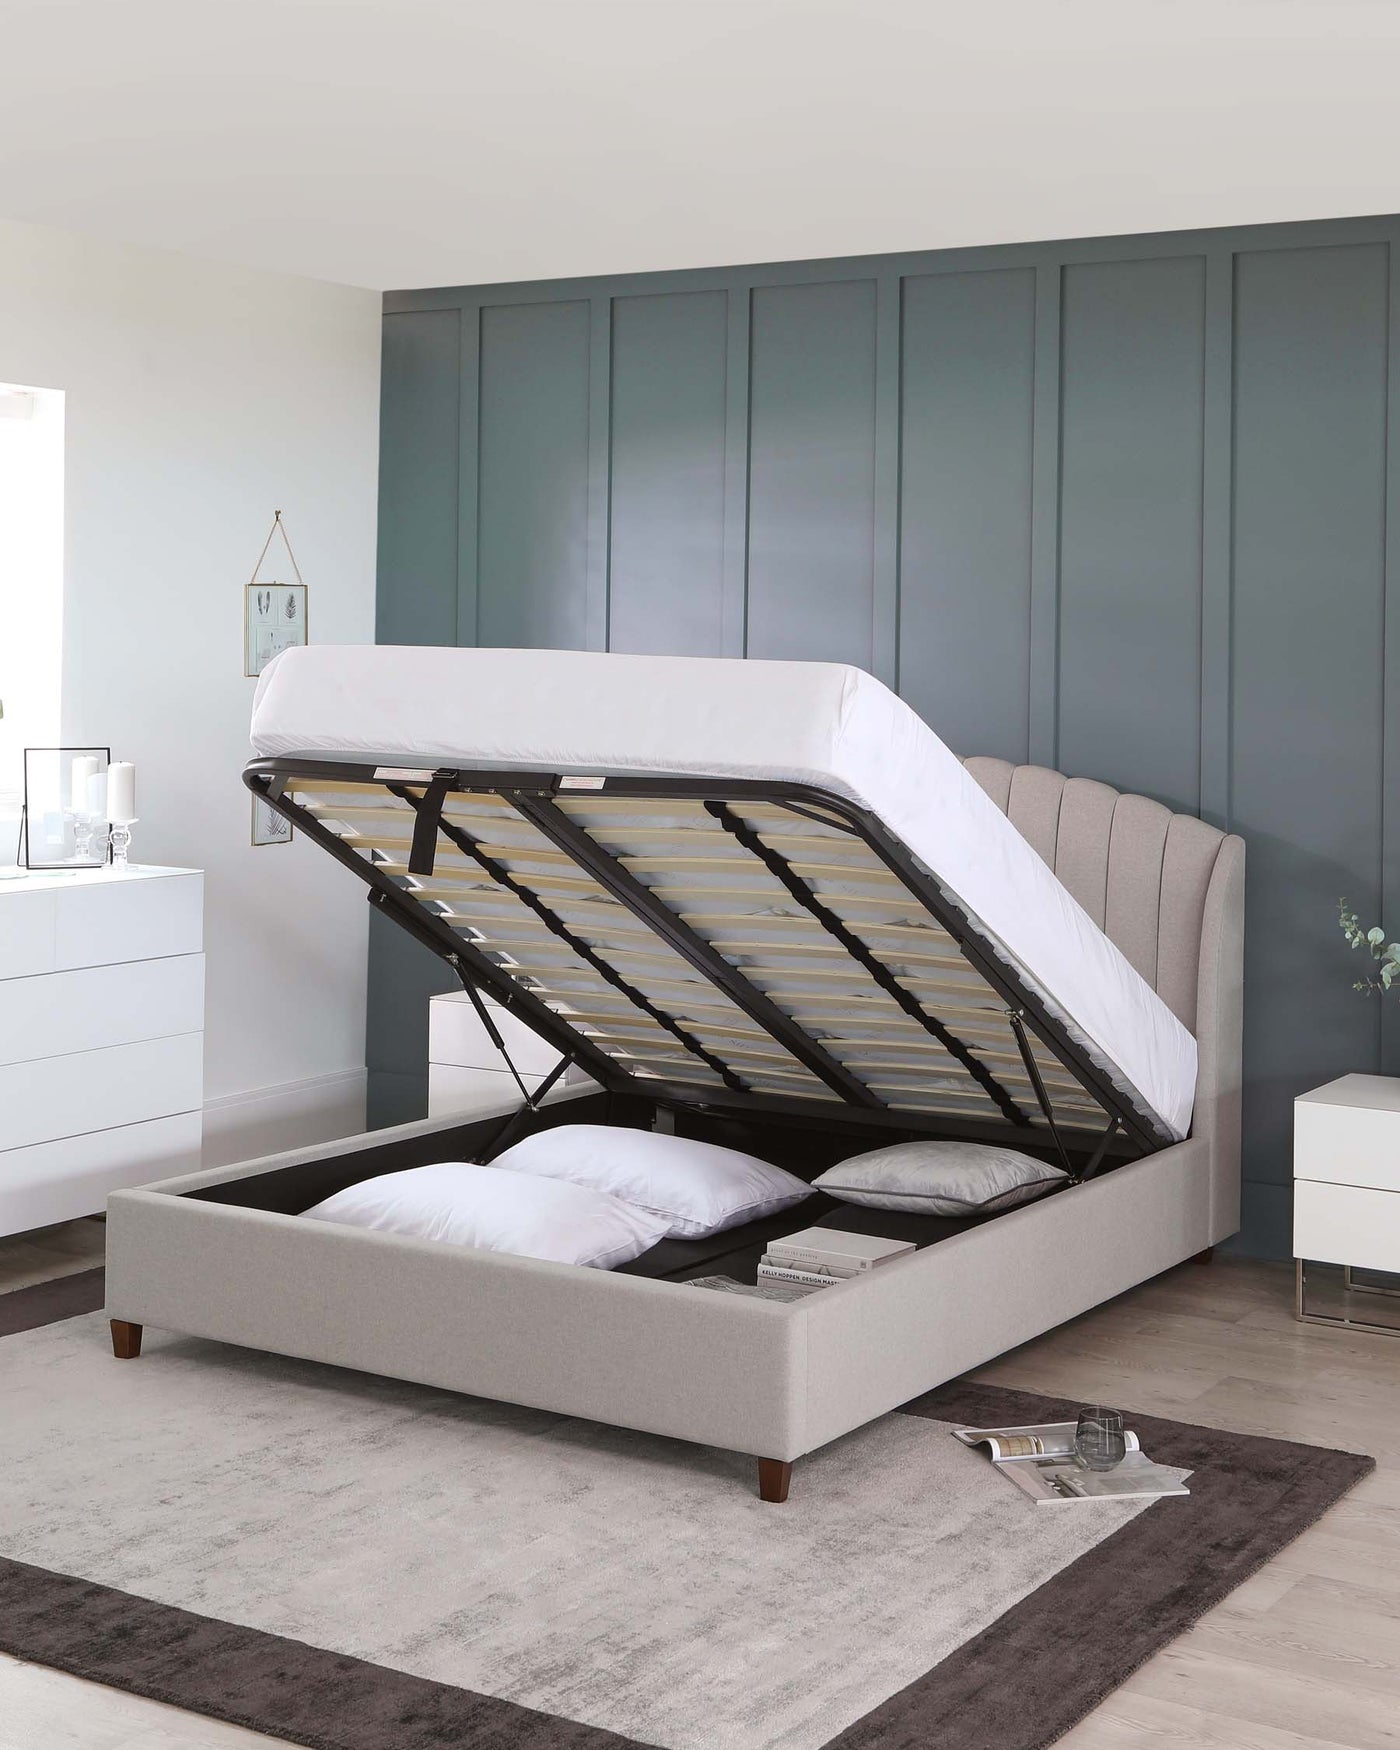 Upholstered lift-up storage bed with a tufted headboard and wood feet, featuring wooden slats partially visible under a raised mattress platform. A white nightstand with drawers and a clear glass lamp to the side; all staged on a grey area rug with a decorative clock and unlit candle as accents.